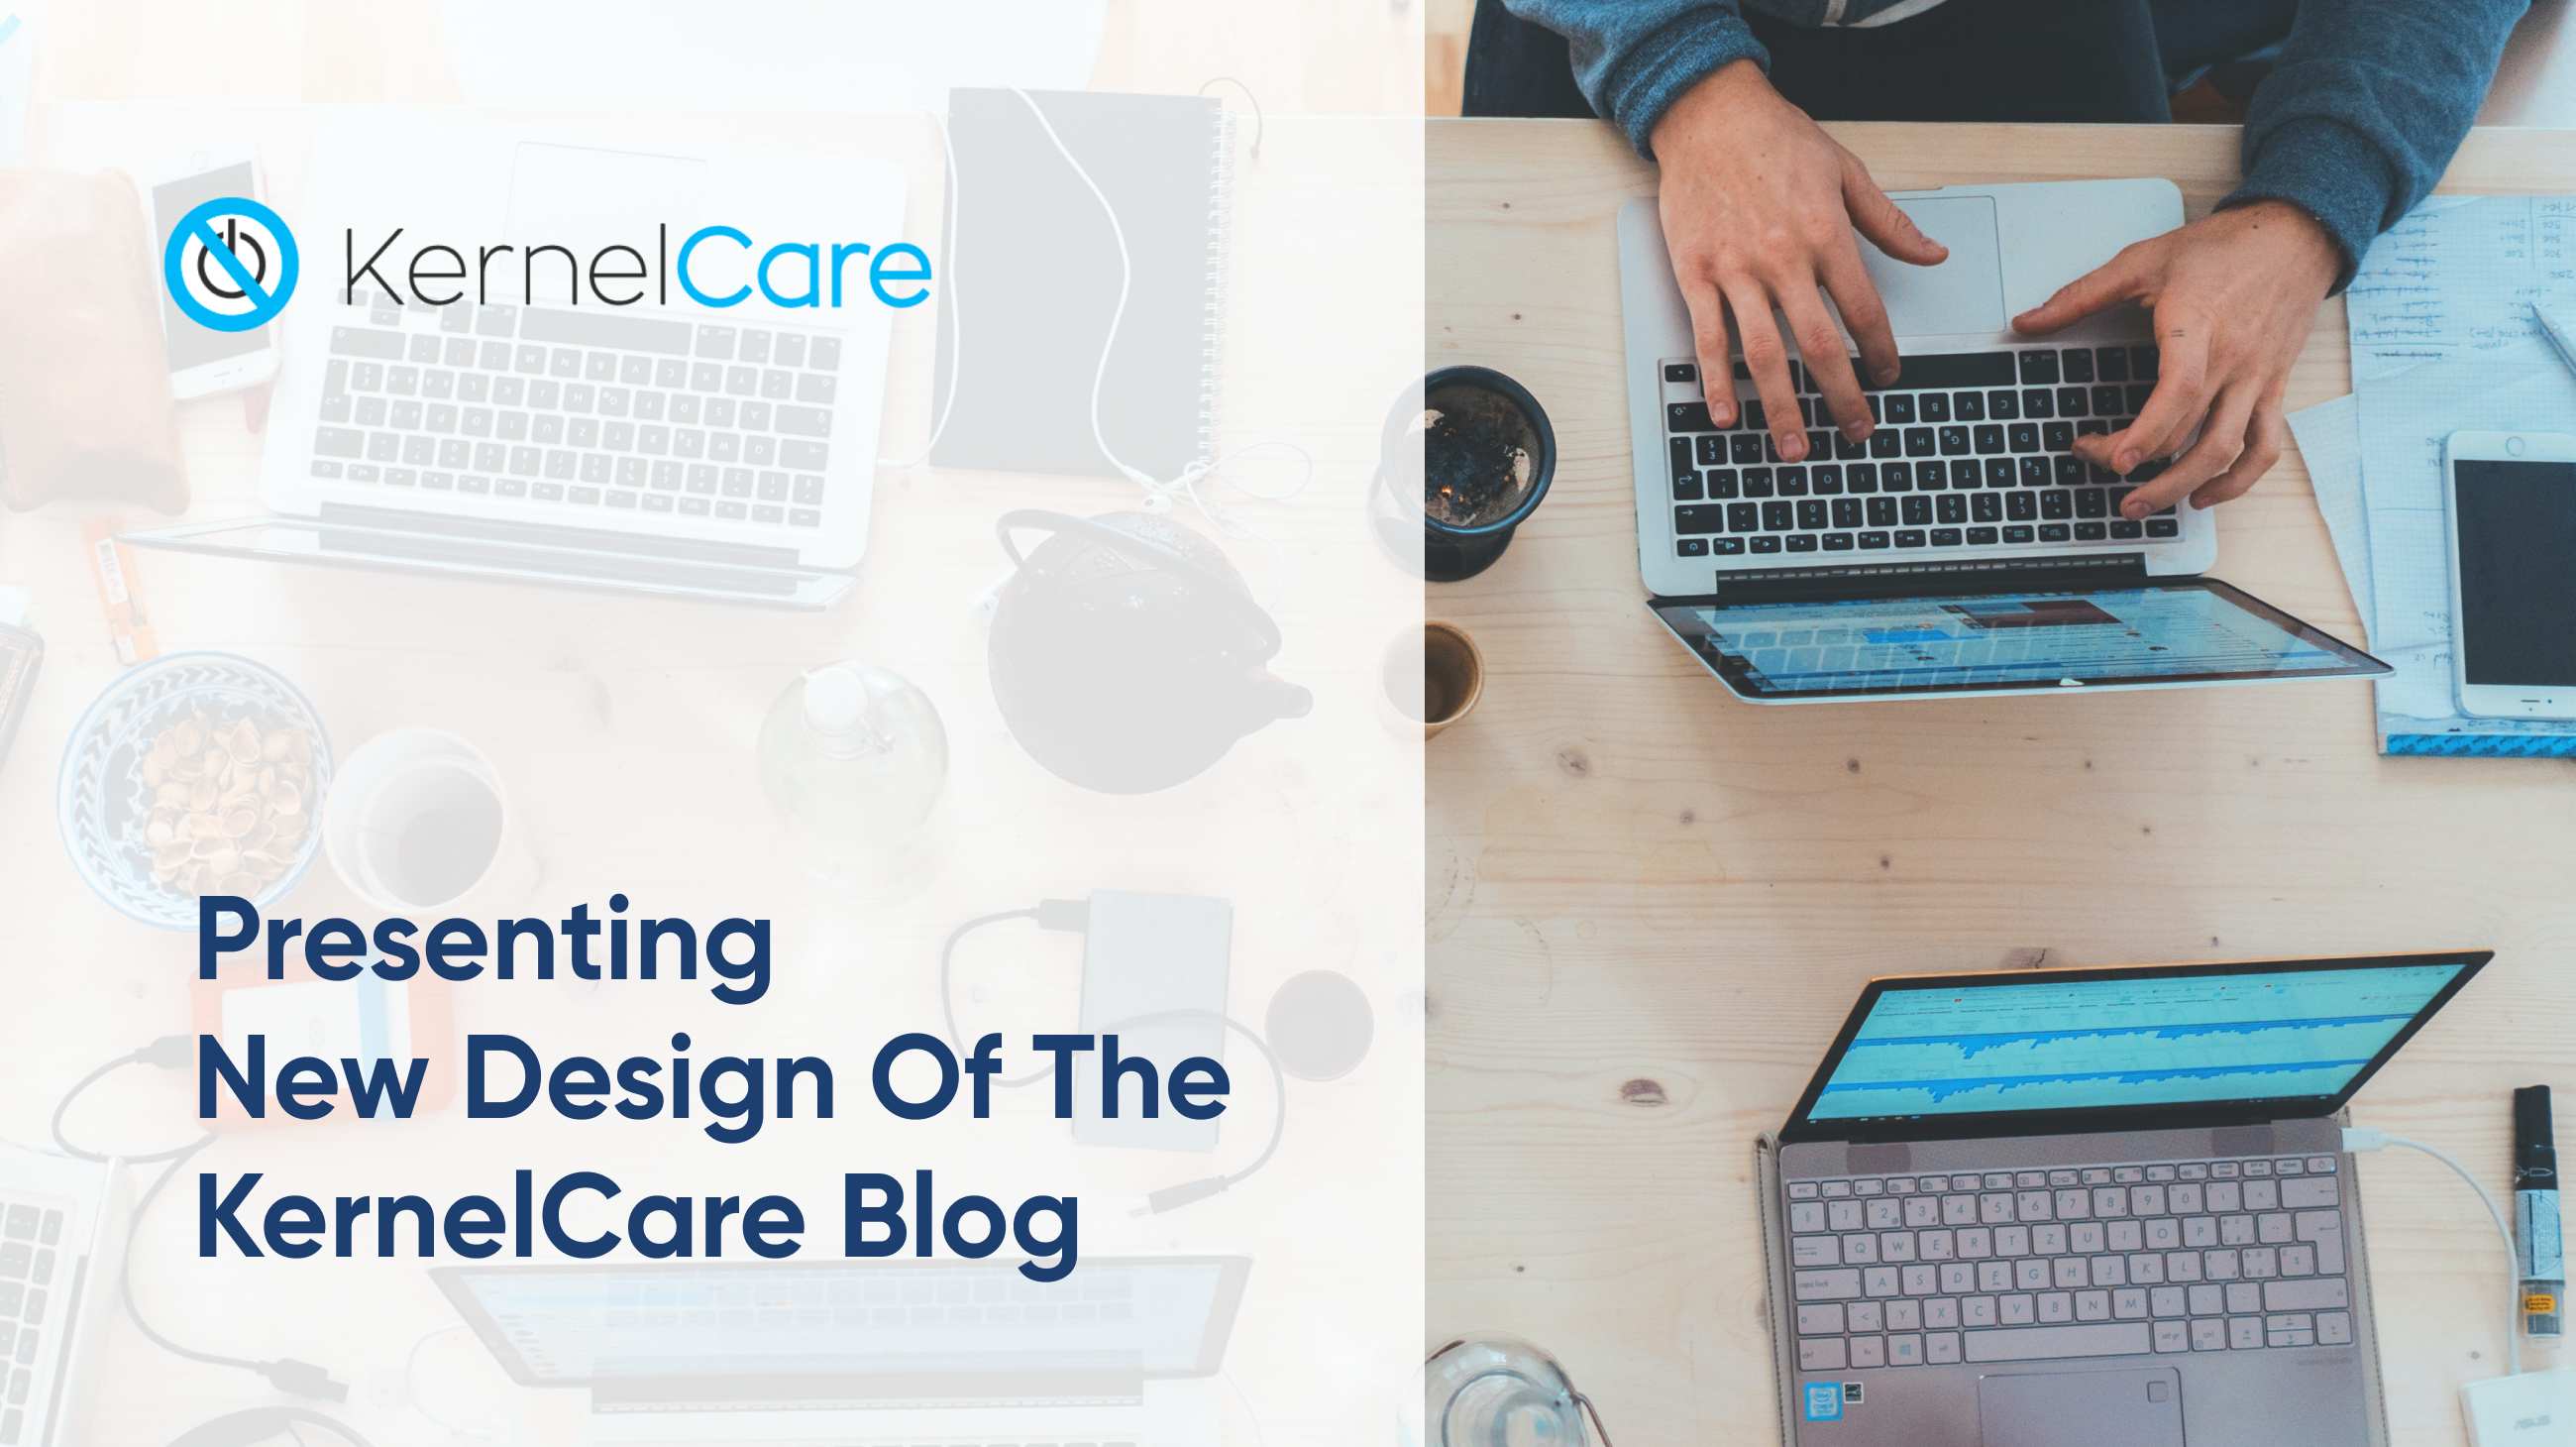 Presenting New Design Of The KernelCare Blog